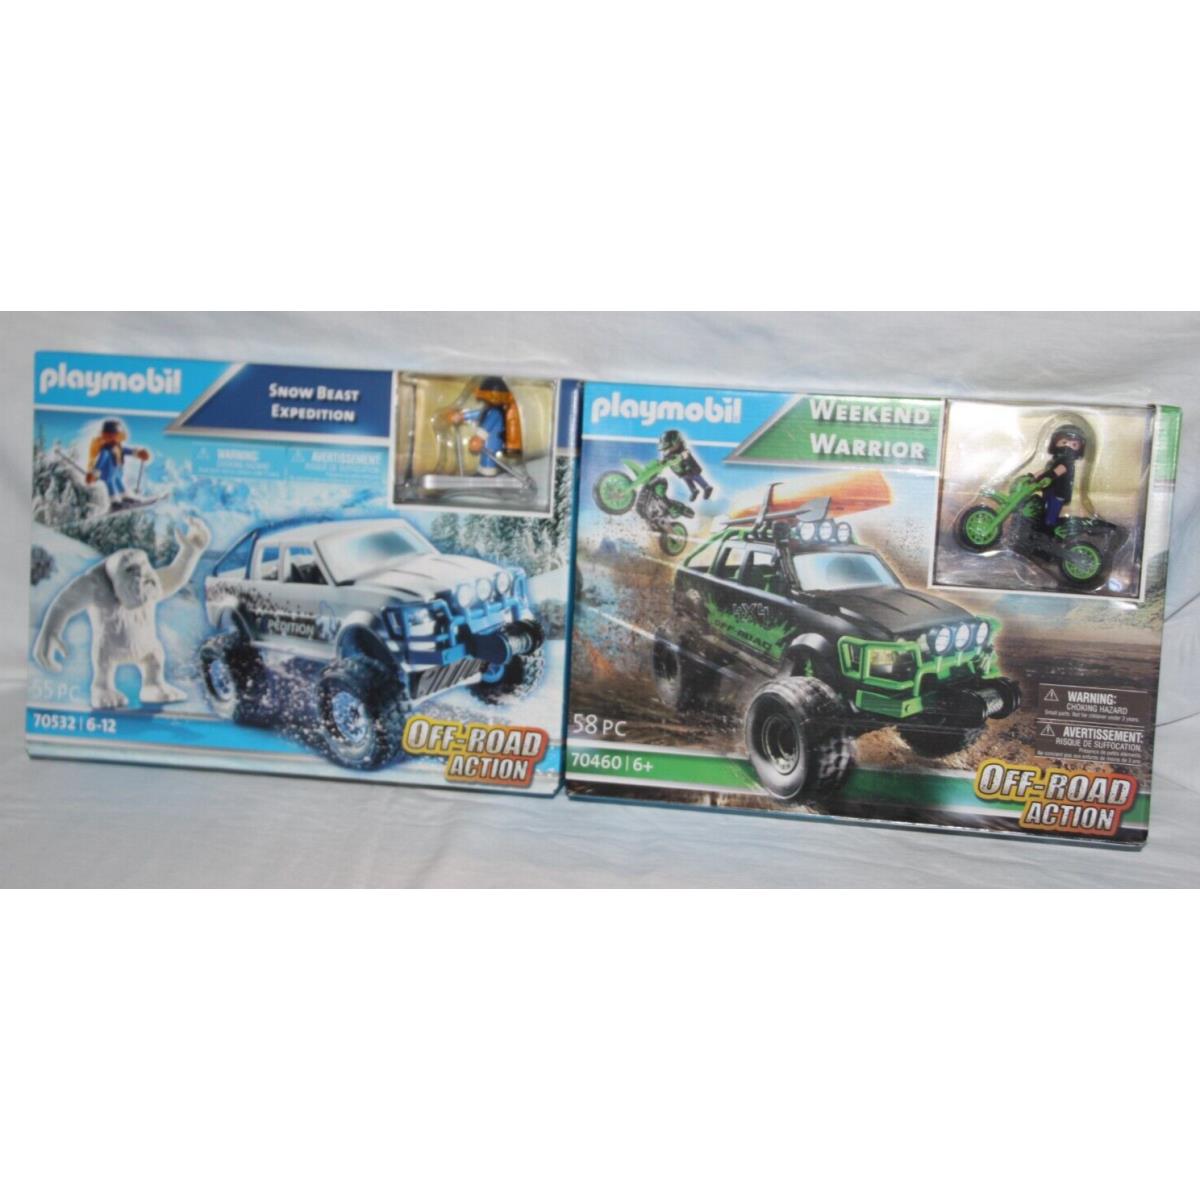 Playmobil 70532 Snow Beast Expedition 70460 Weekend Warrior Off Road Action